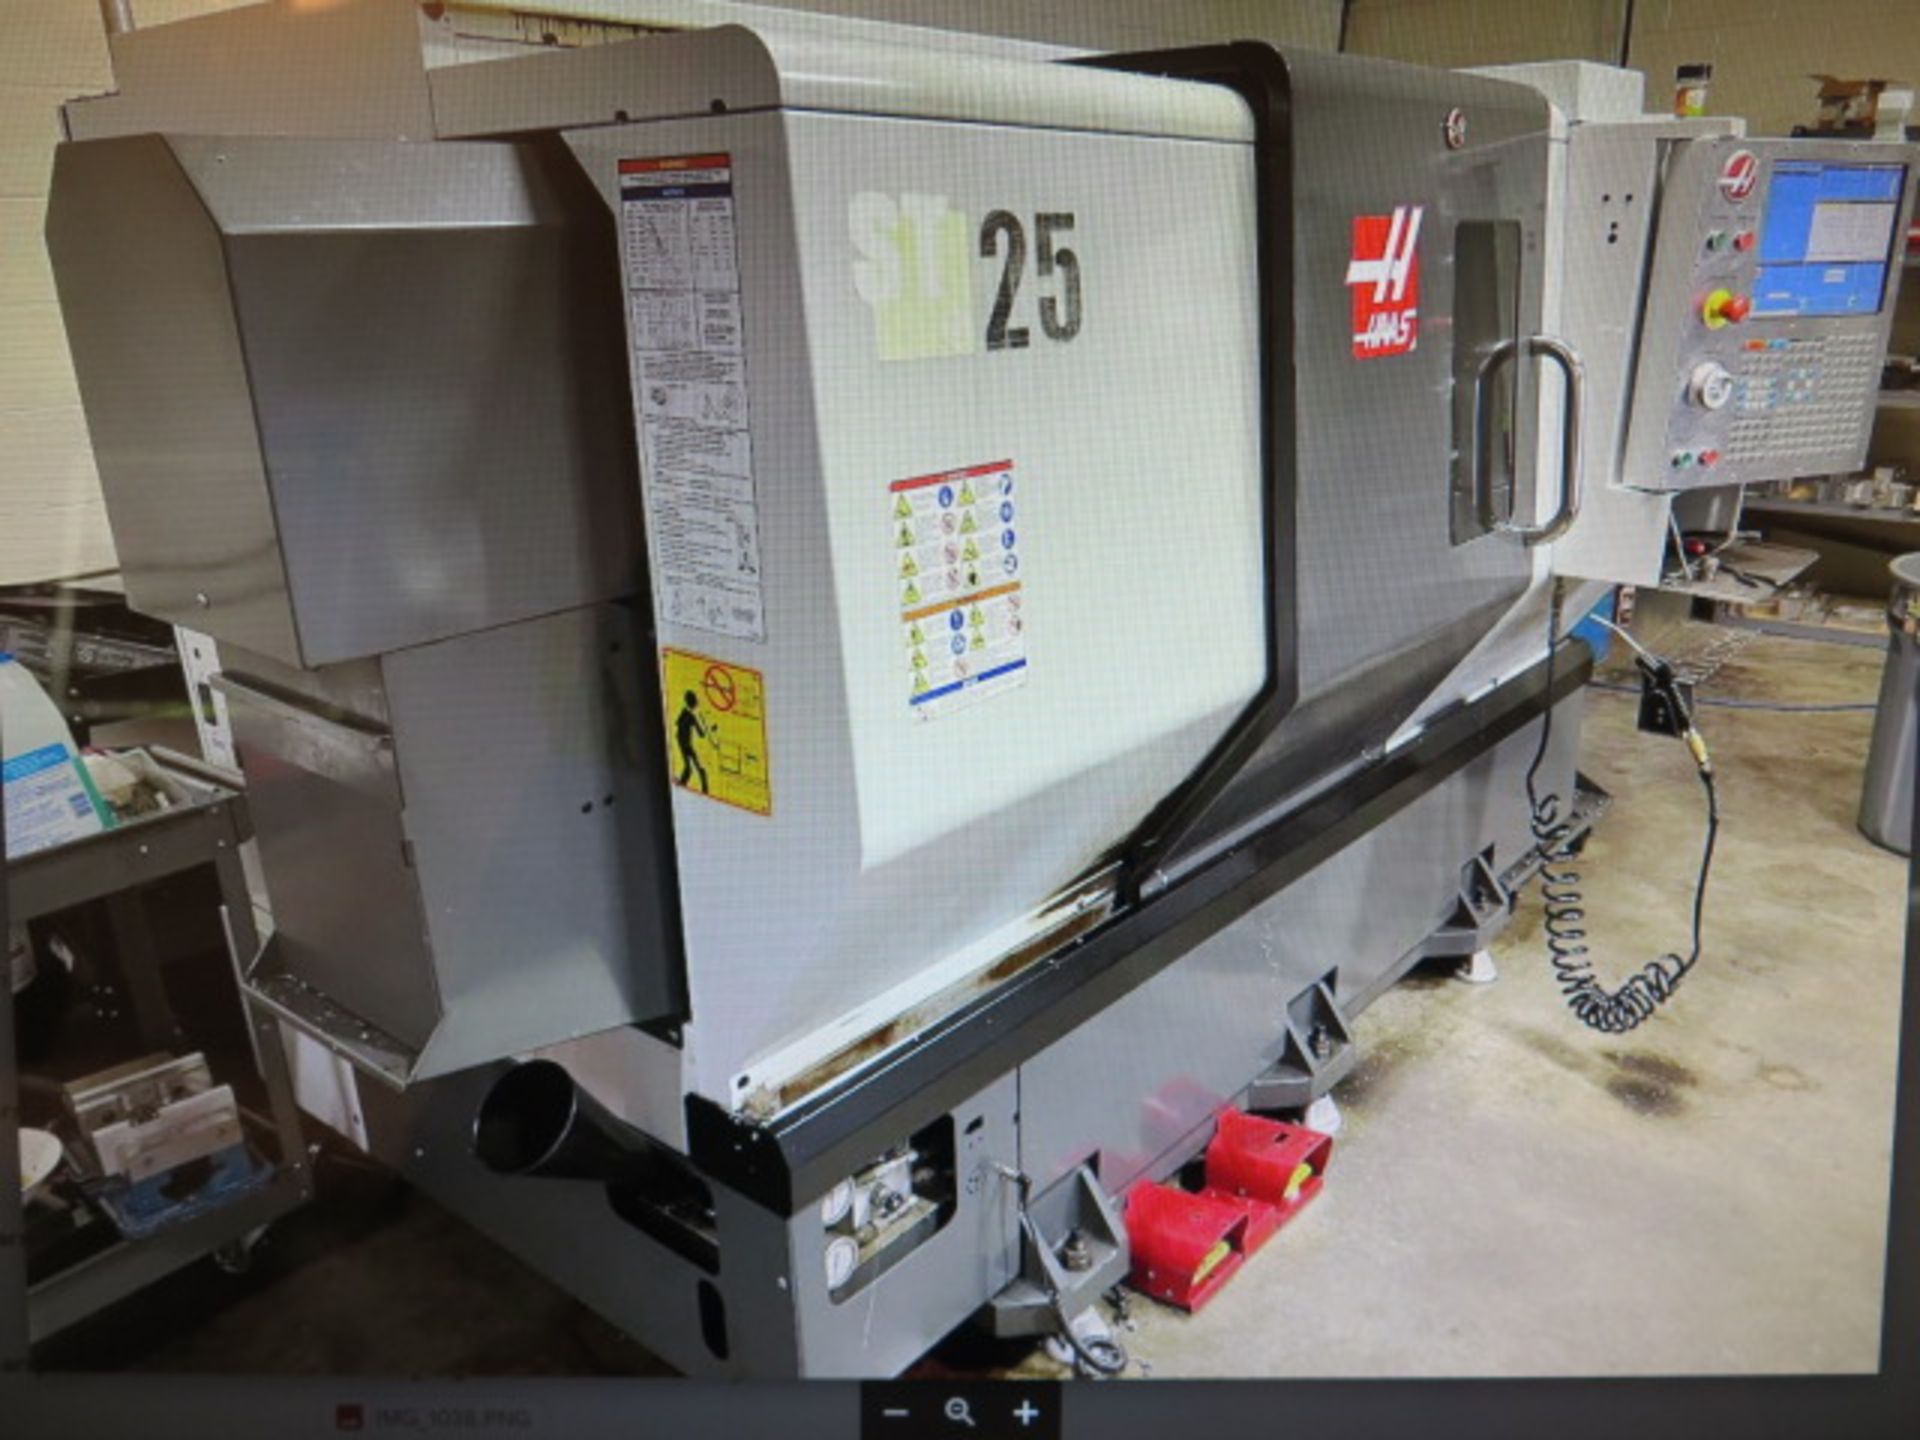 2014 Haas SL-25 CNC Turning Center, Tool Presetter, 3400 RPM, 12-Station Turret, SOLD AS IS - Image 3 of 5